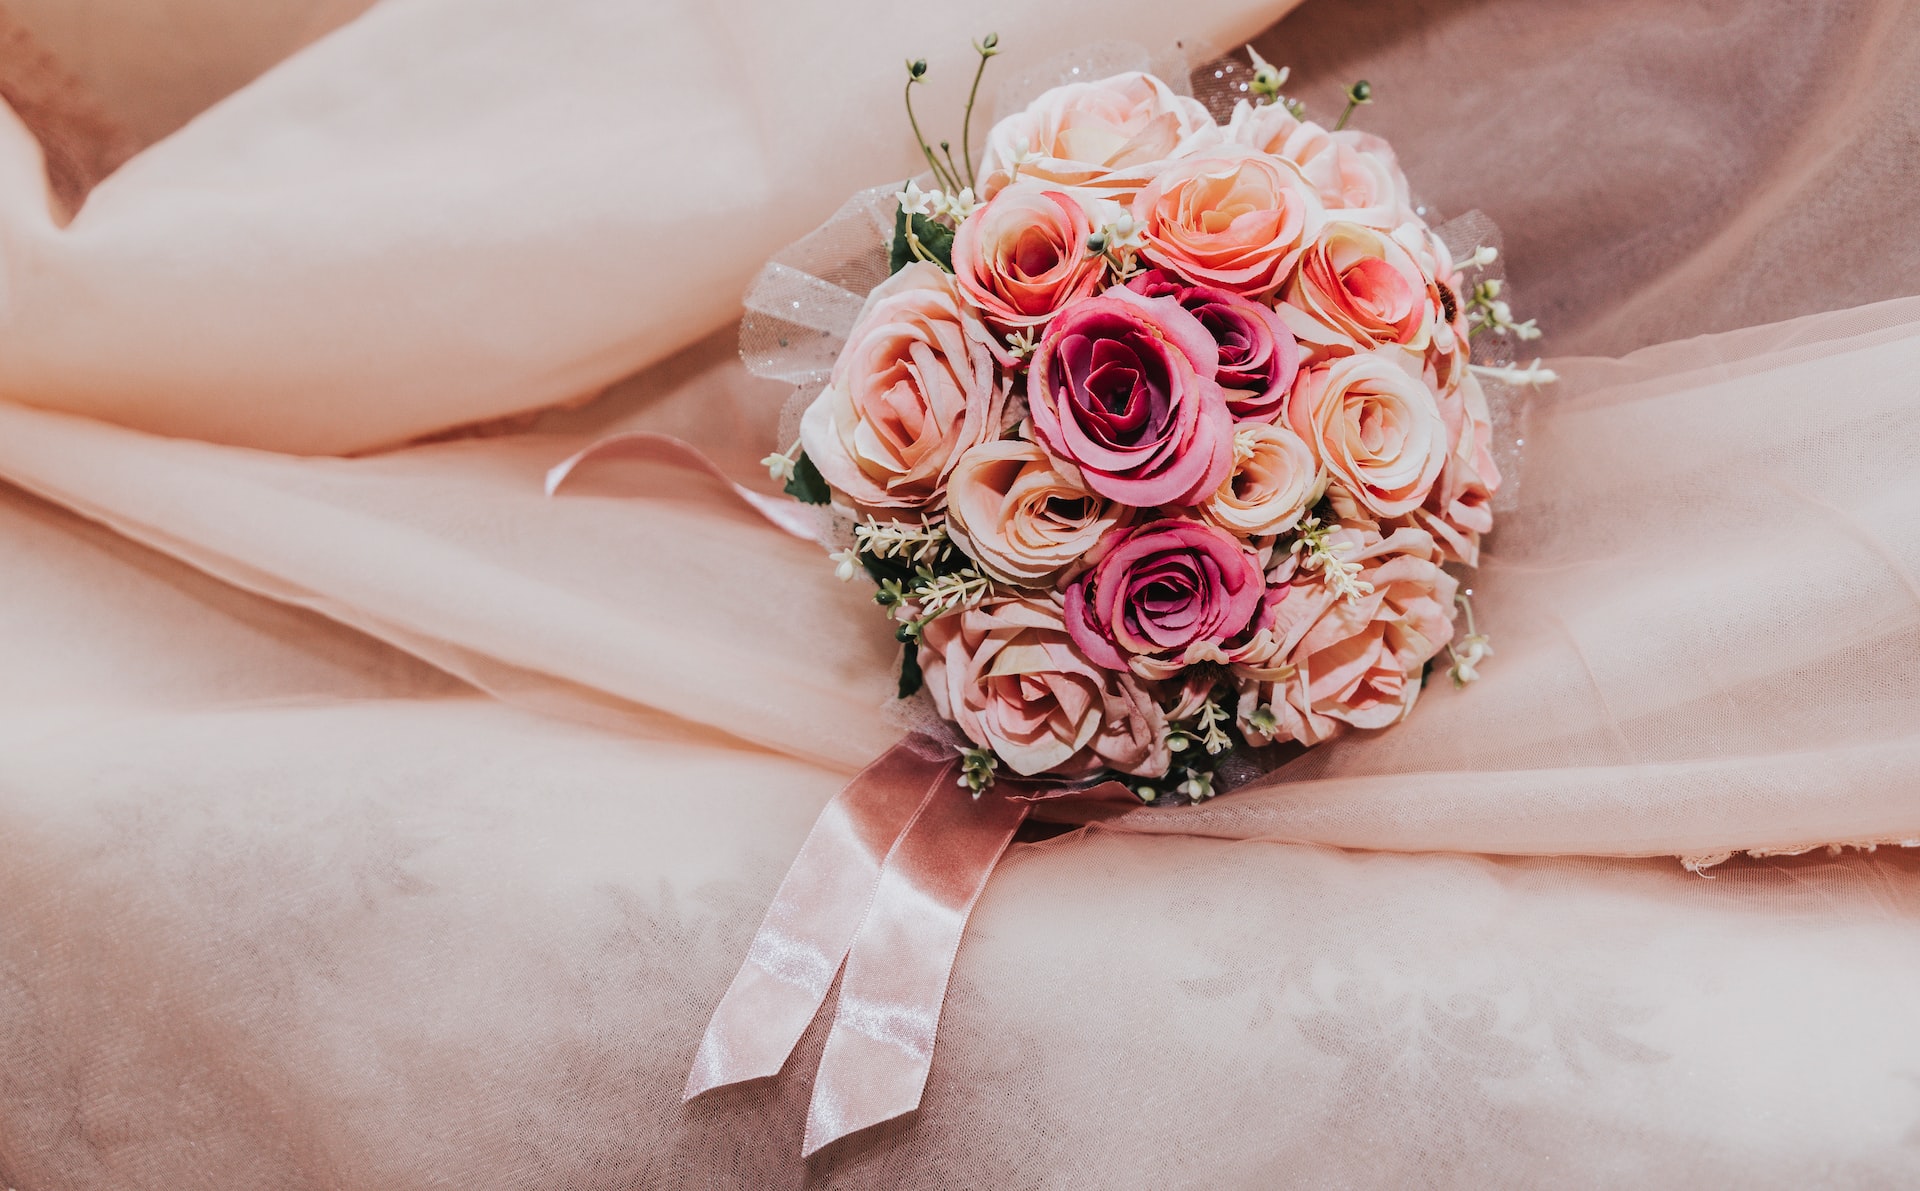 wedding bouquet of pink roses with ribbon on pink cloth